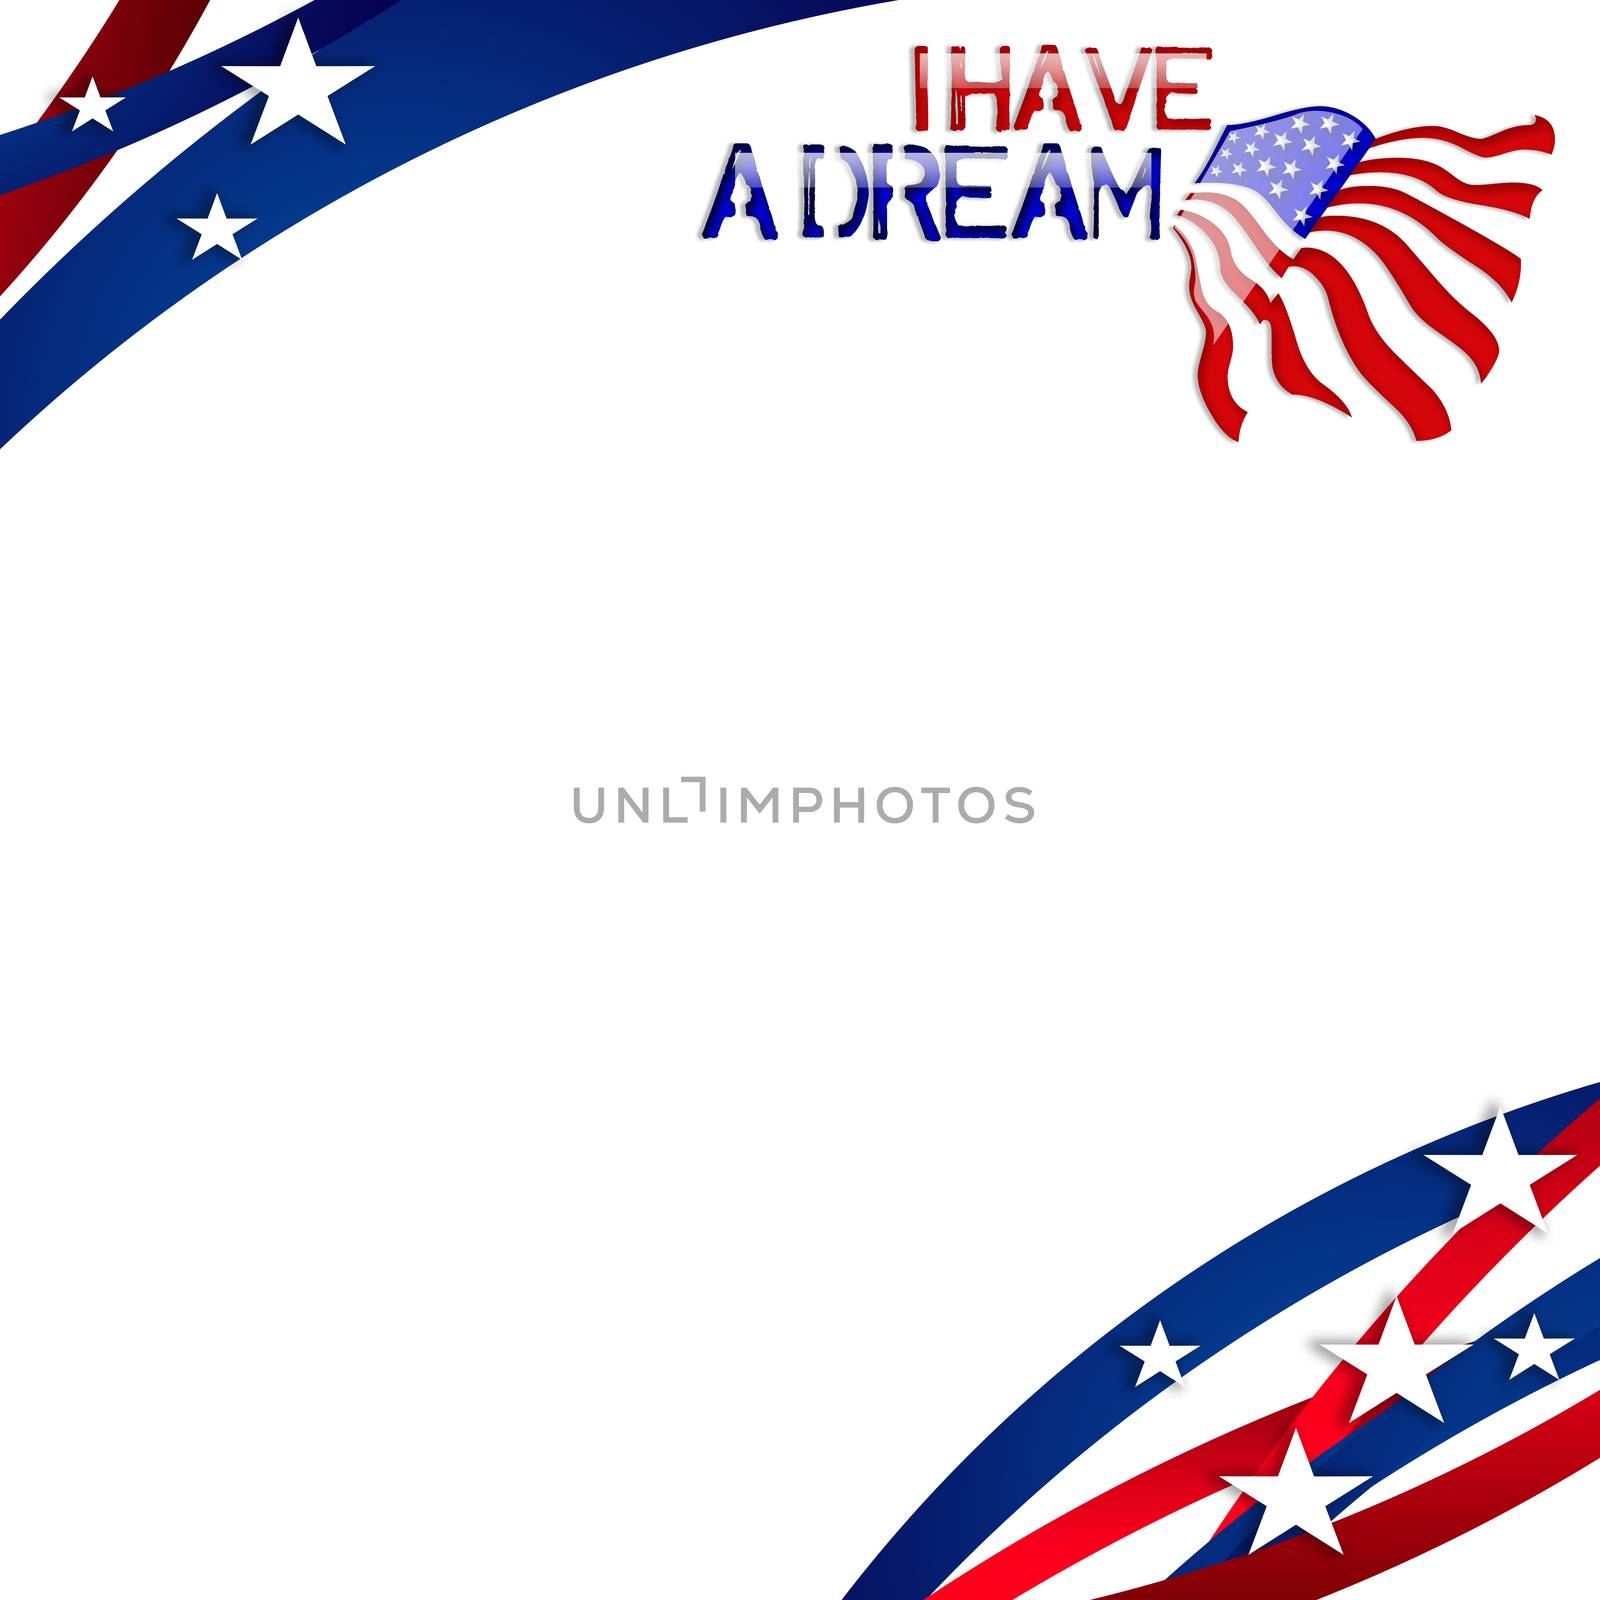 An abstract American patriotic illustration